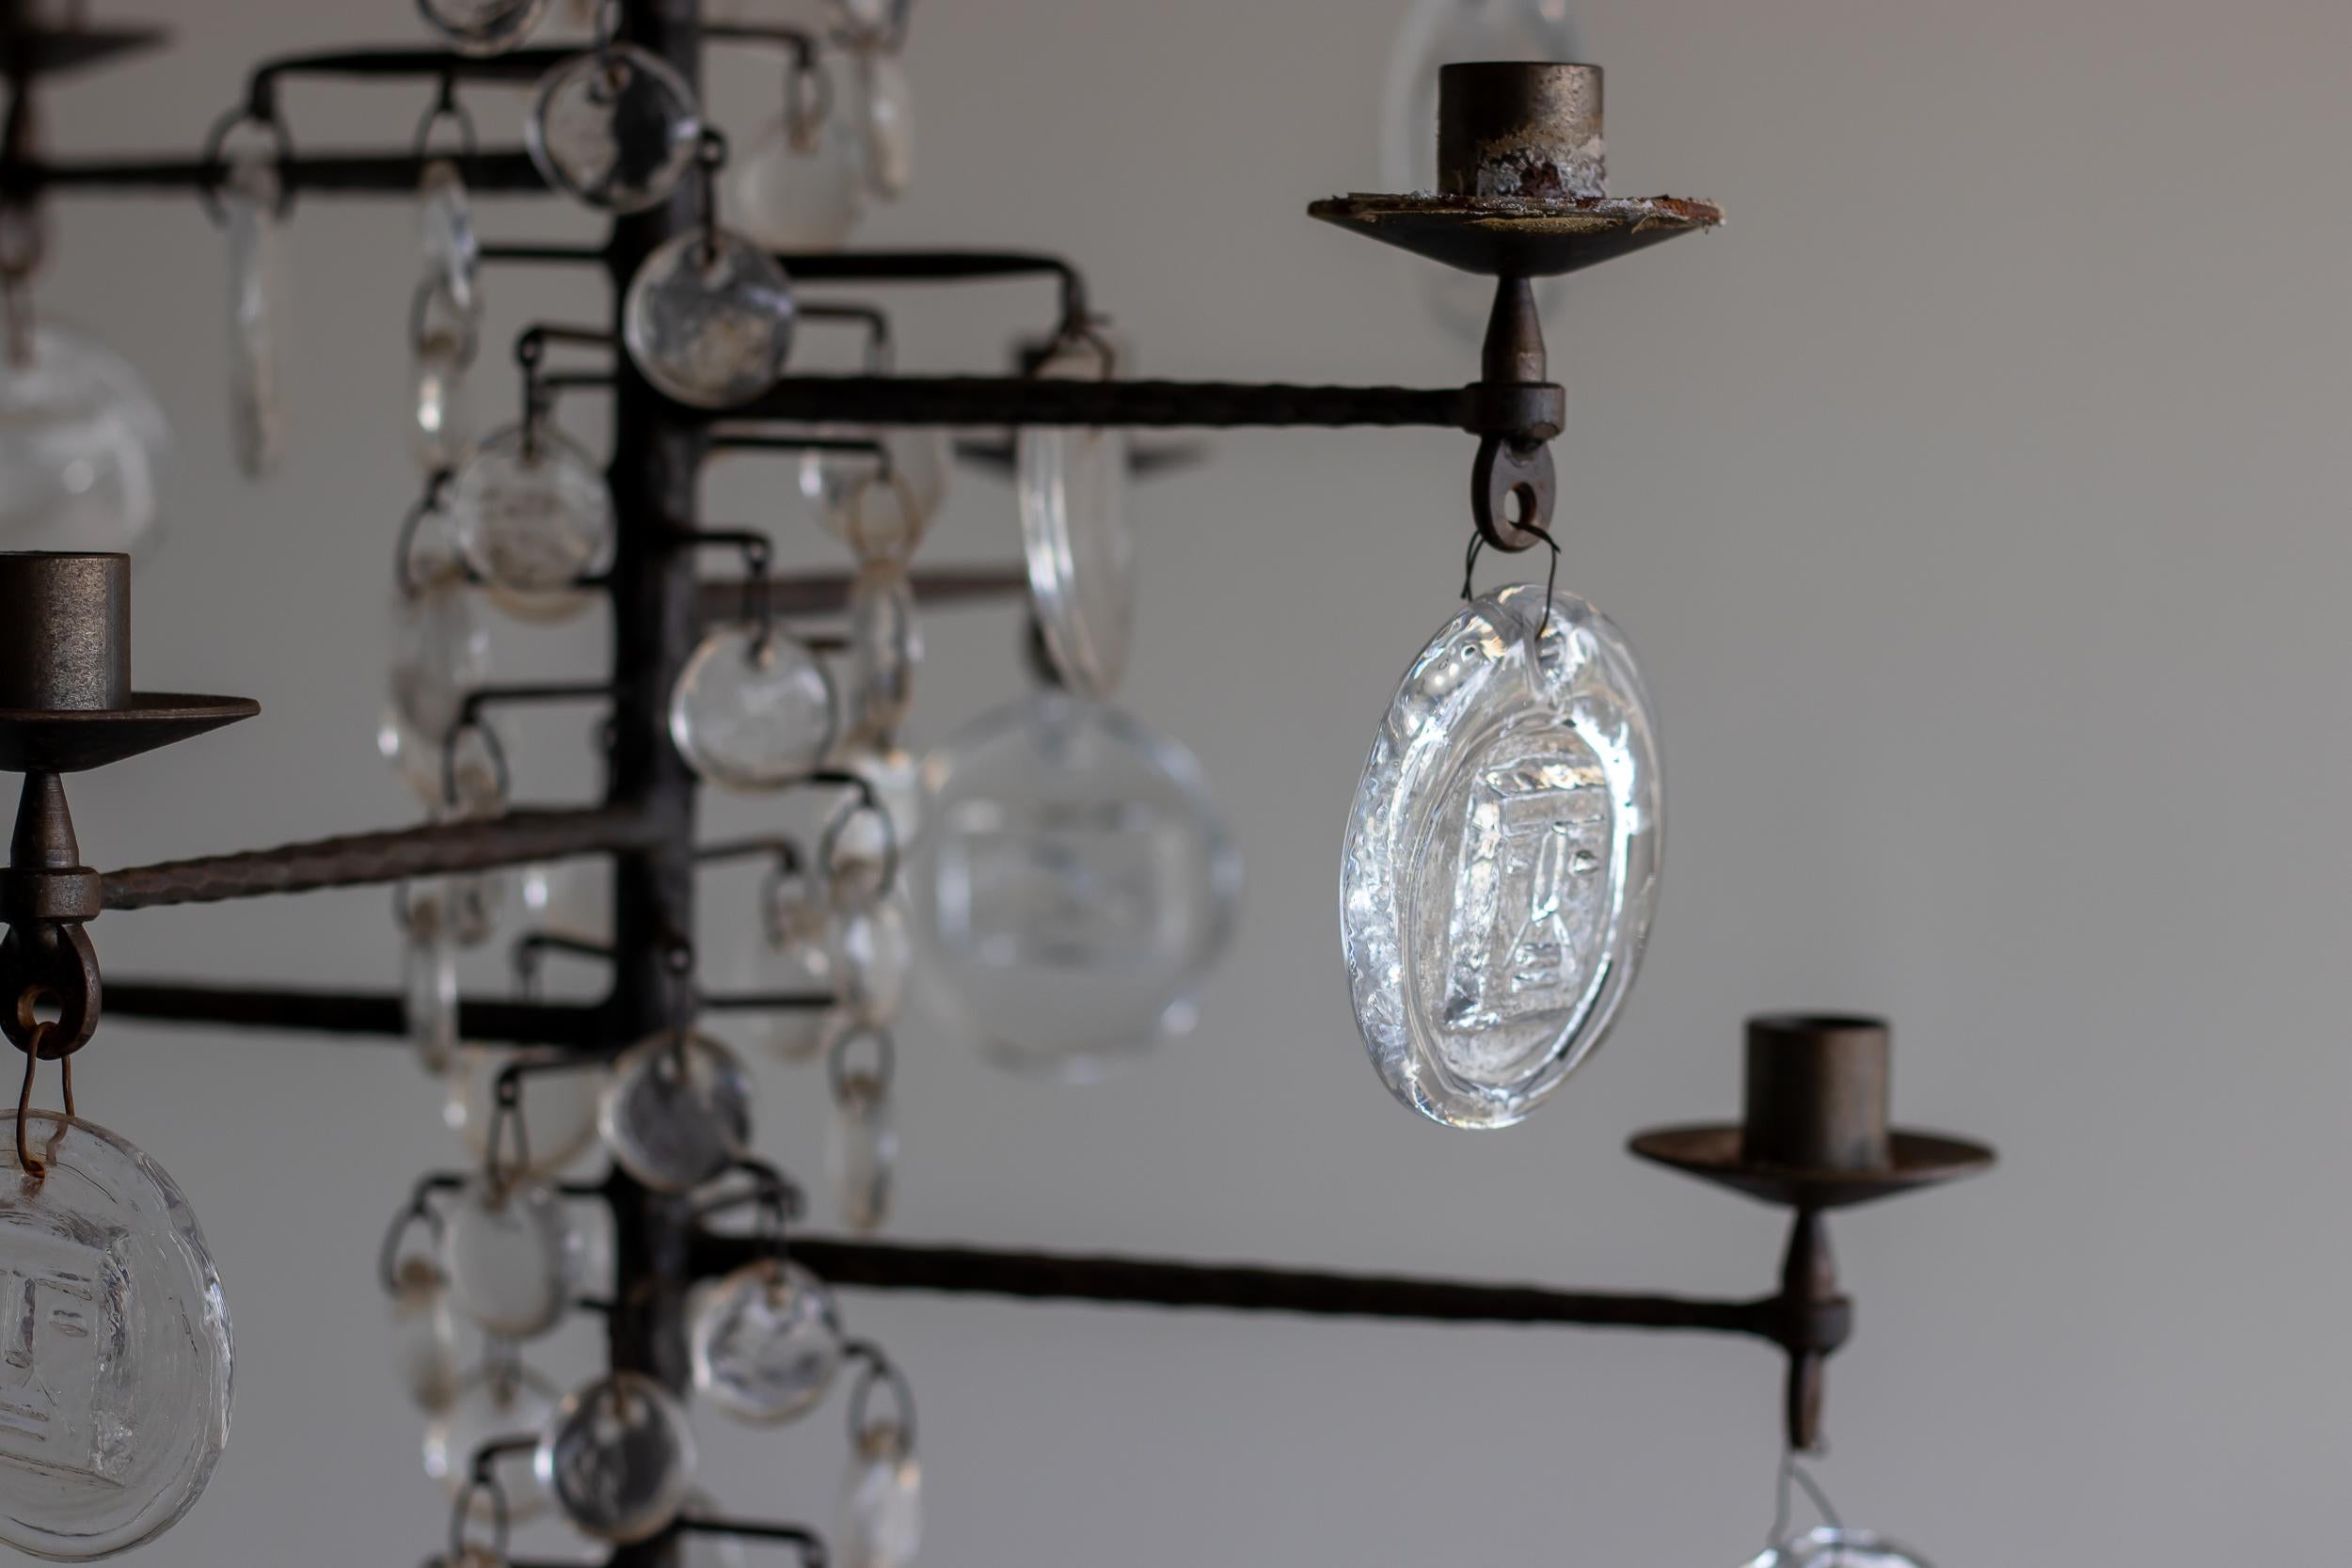 A vintage twelve-arm chandelier designed by Erik Hoglund, model 341.
Glass pendants made by Boda Nova Glassworks; wrought iron frame made by Axel Stromberg Ironworks, Sweden, circa 1957. Features a variety of glass pendants; larger pendants have